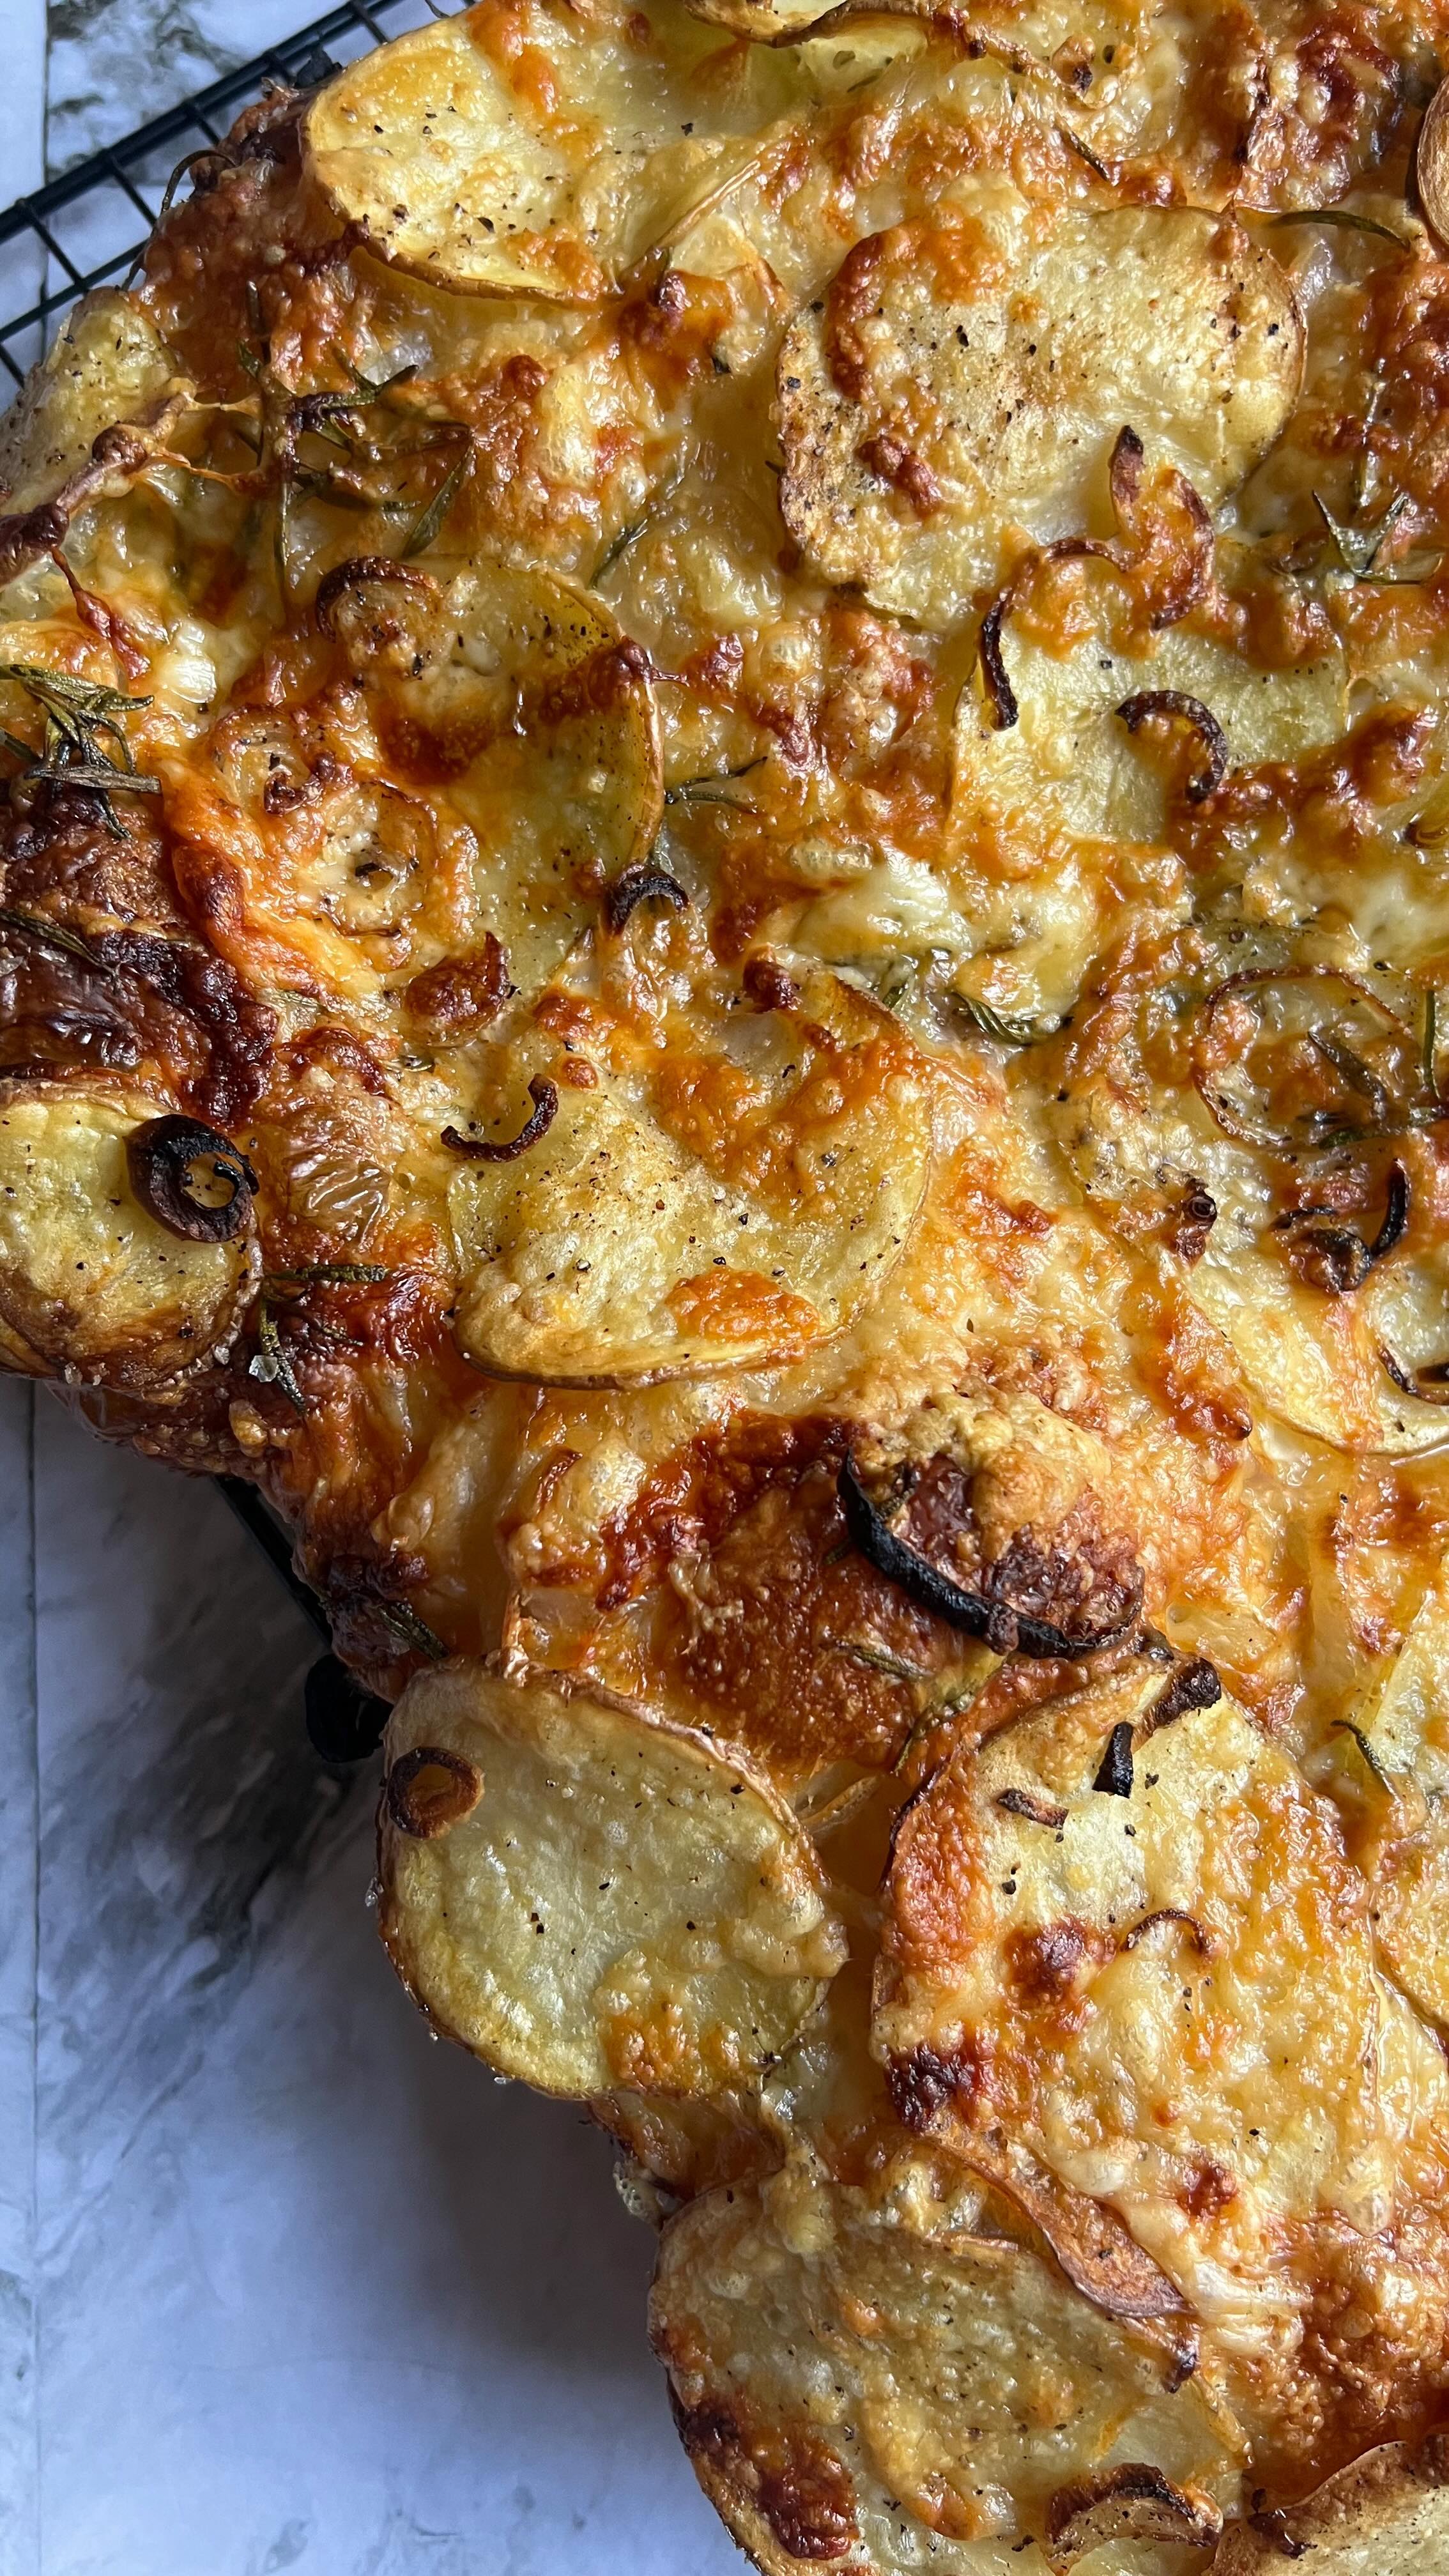 PotatoeS, PizzaS and PocketS on dresses 👗 

Comment RECIPE LINKS if you’d like the links for this Focaccia au Gratin and